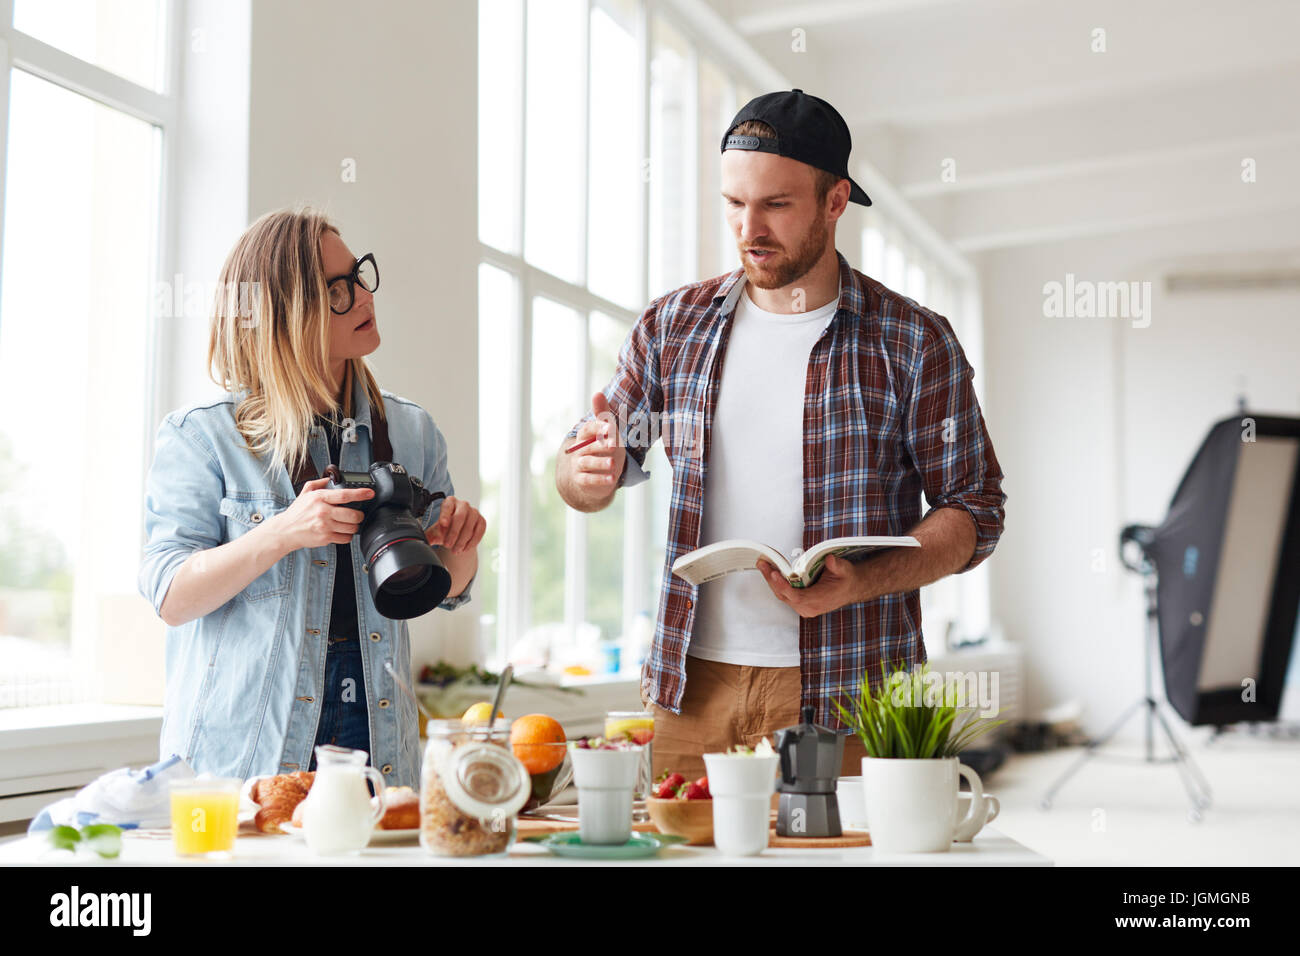 Food-stylist explaining how to make best shots of food Stock Photo